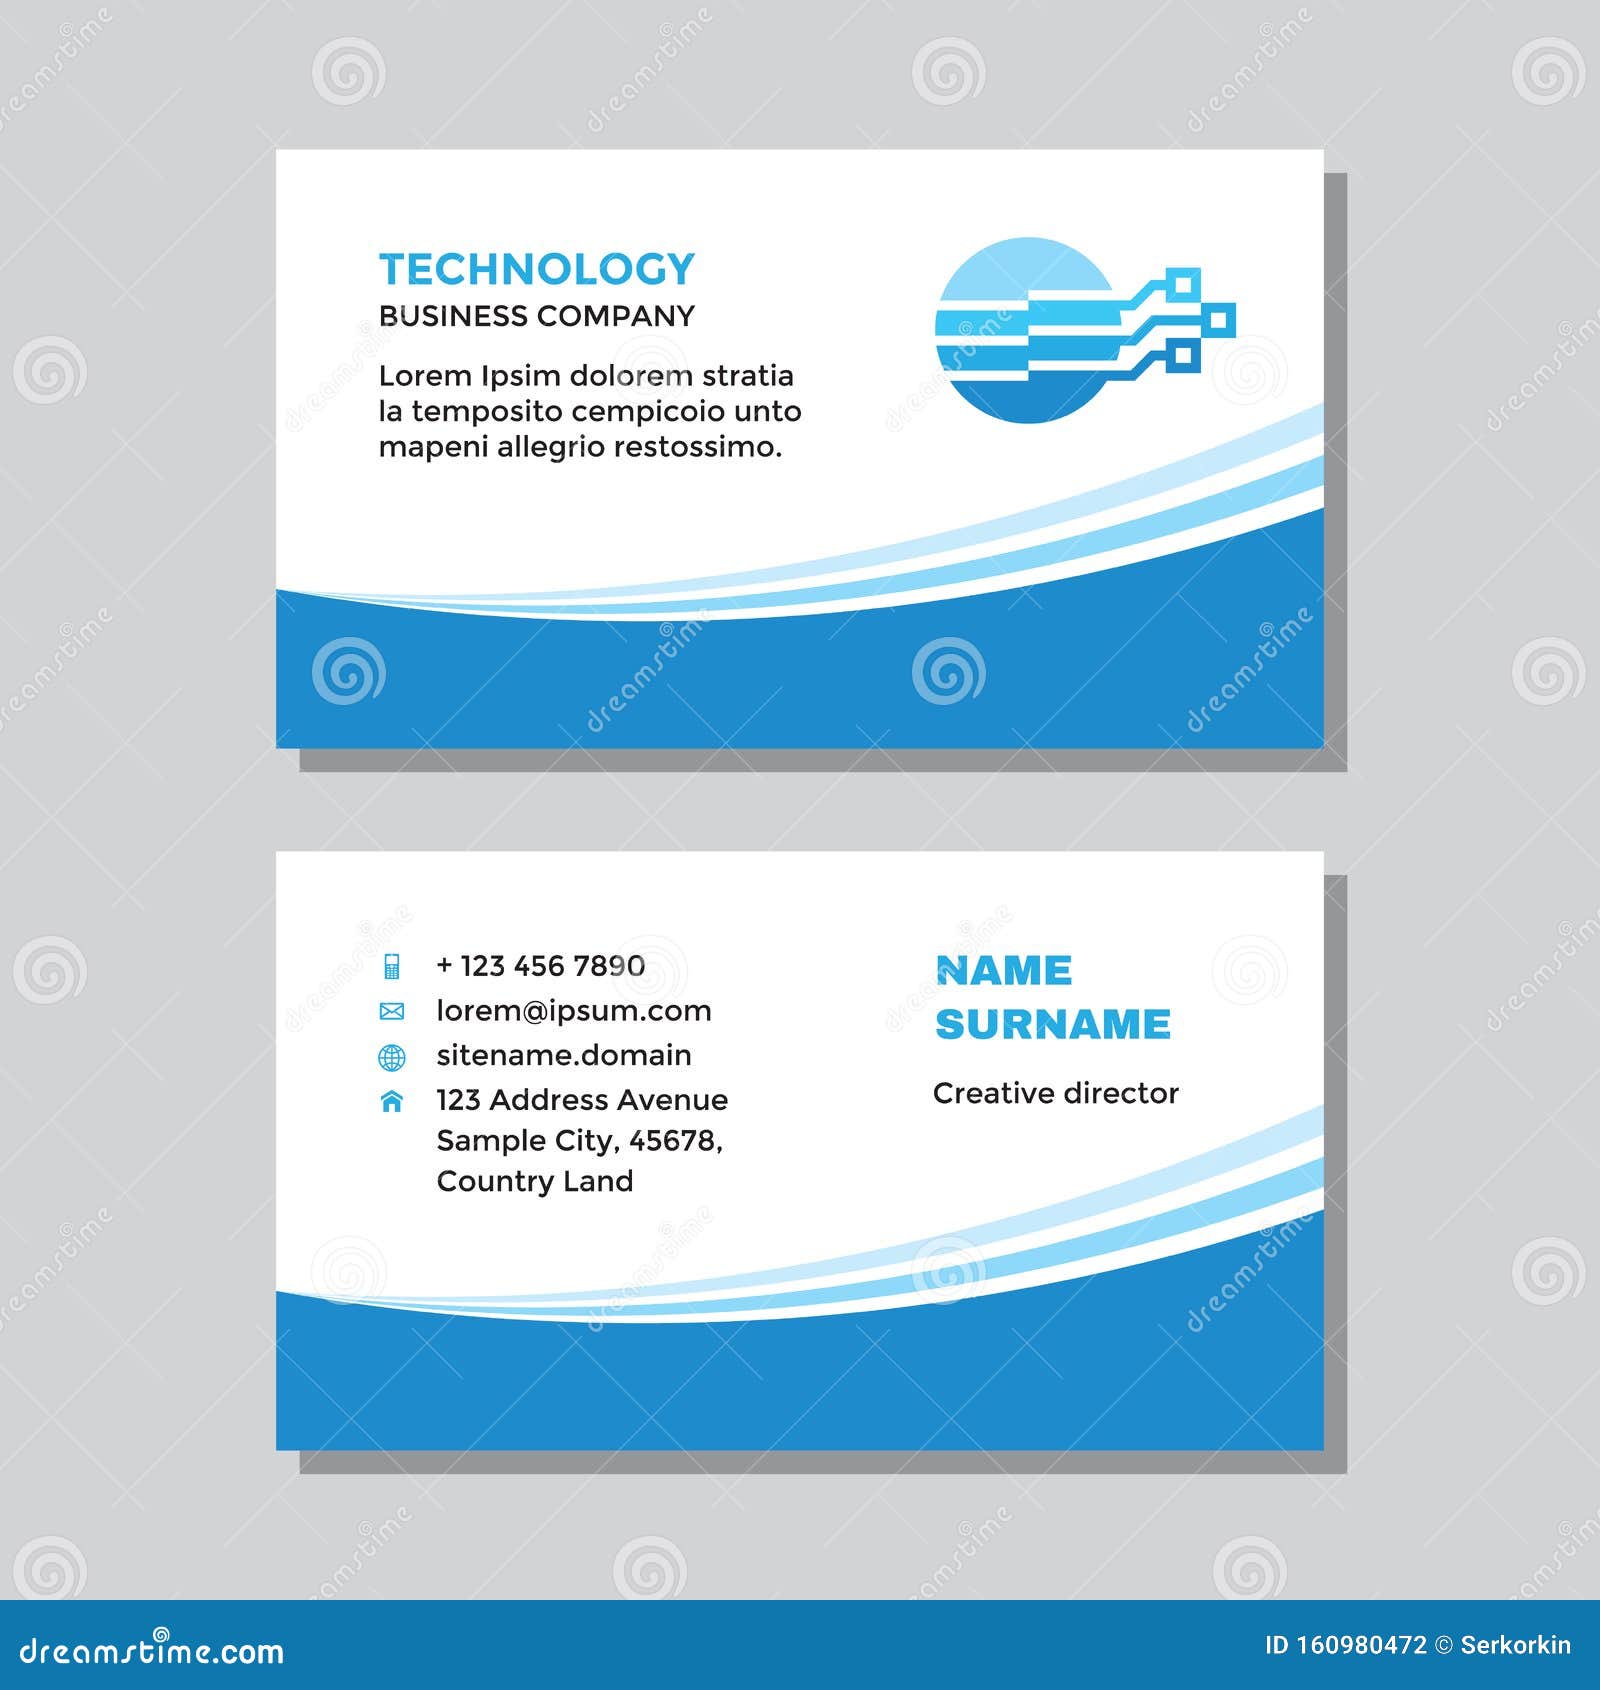 Business Visit Card Template with Logo - Concept Design. Computer Inside Networking Card Template